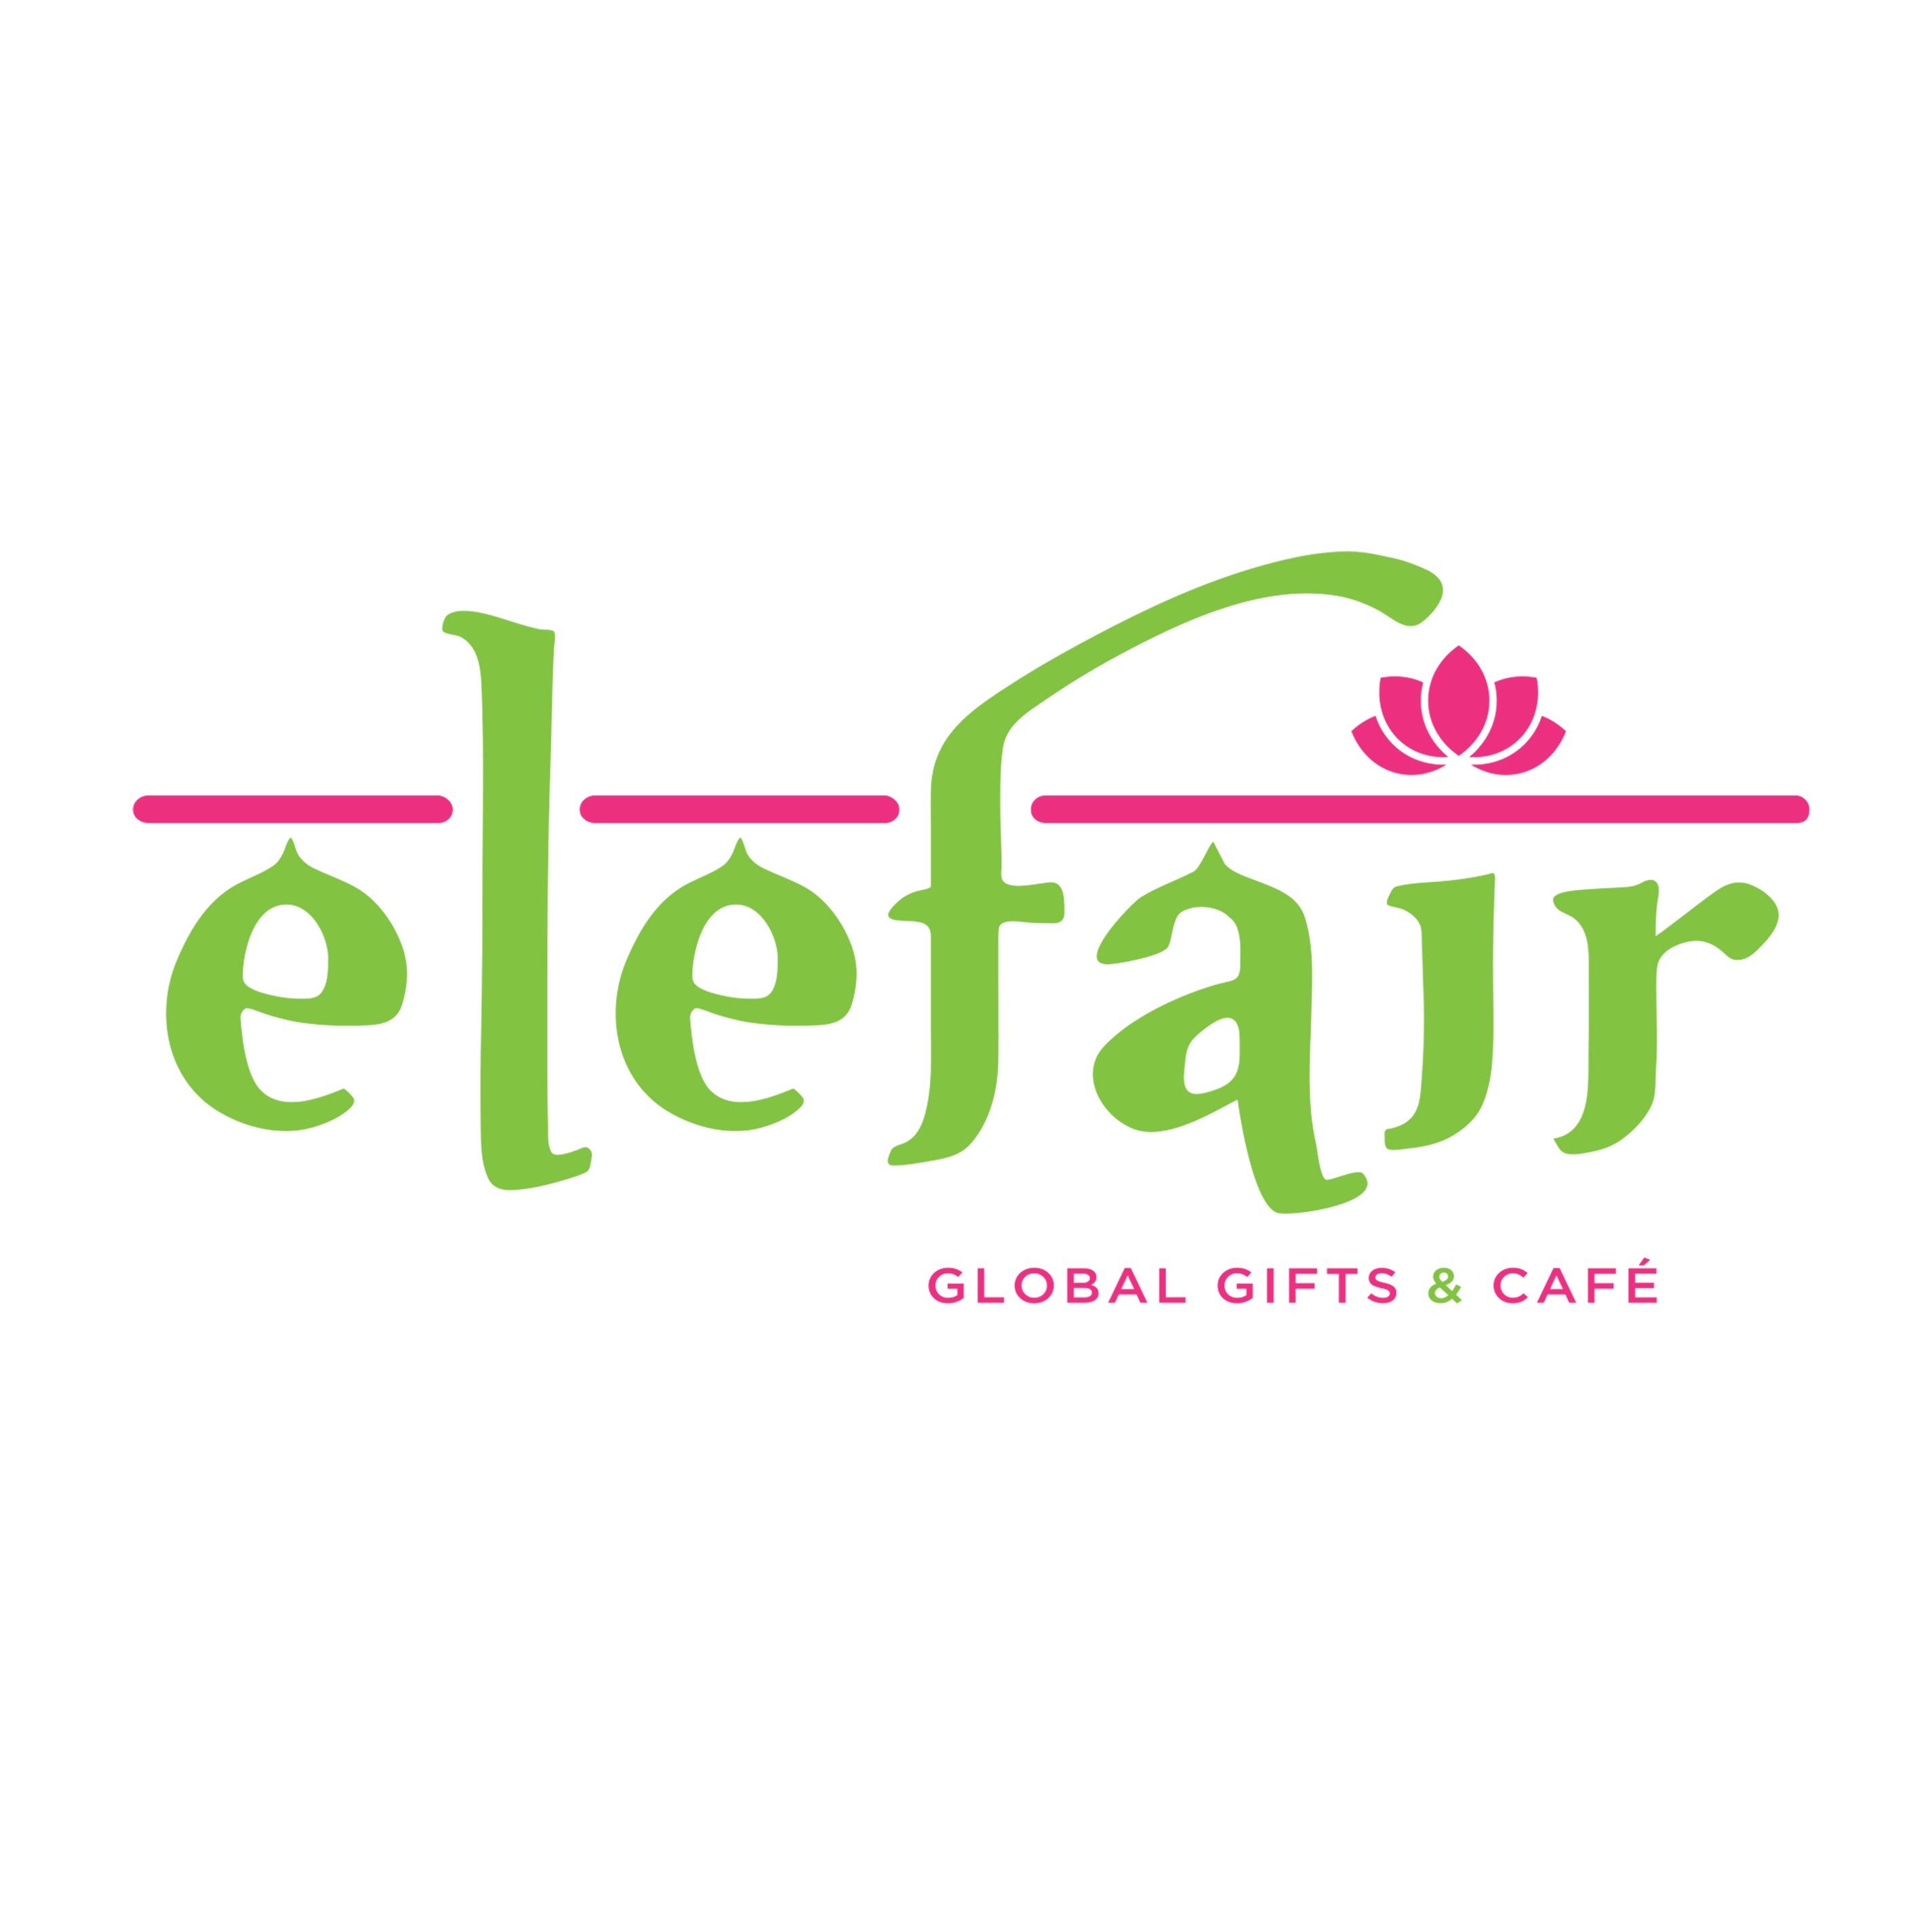 Elefair Giftware is an ethical giftware company selling fairly-traded silver, felt, paper and wooden products from Nepal, Bali and beyond.